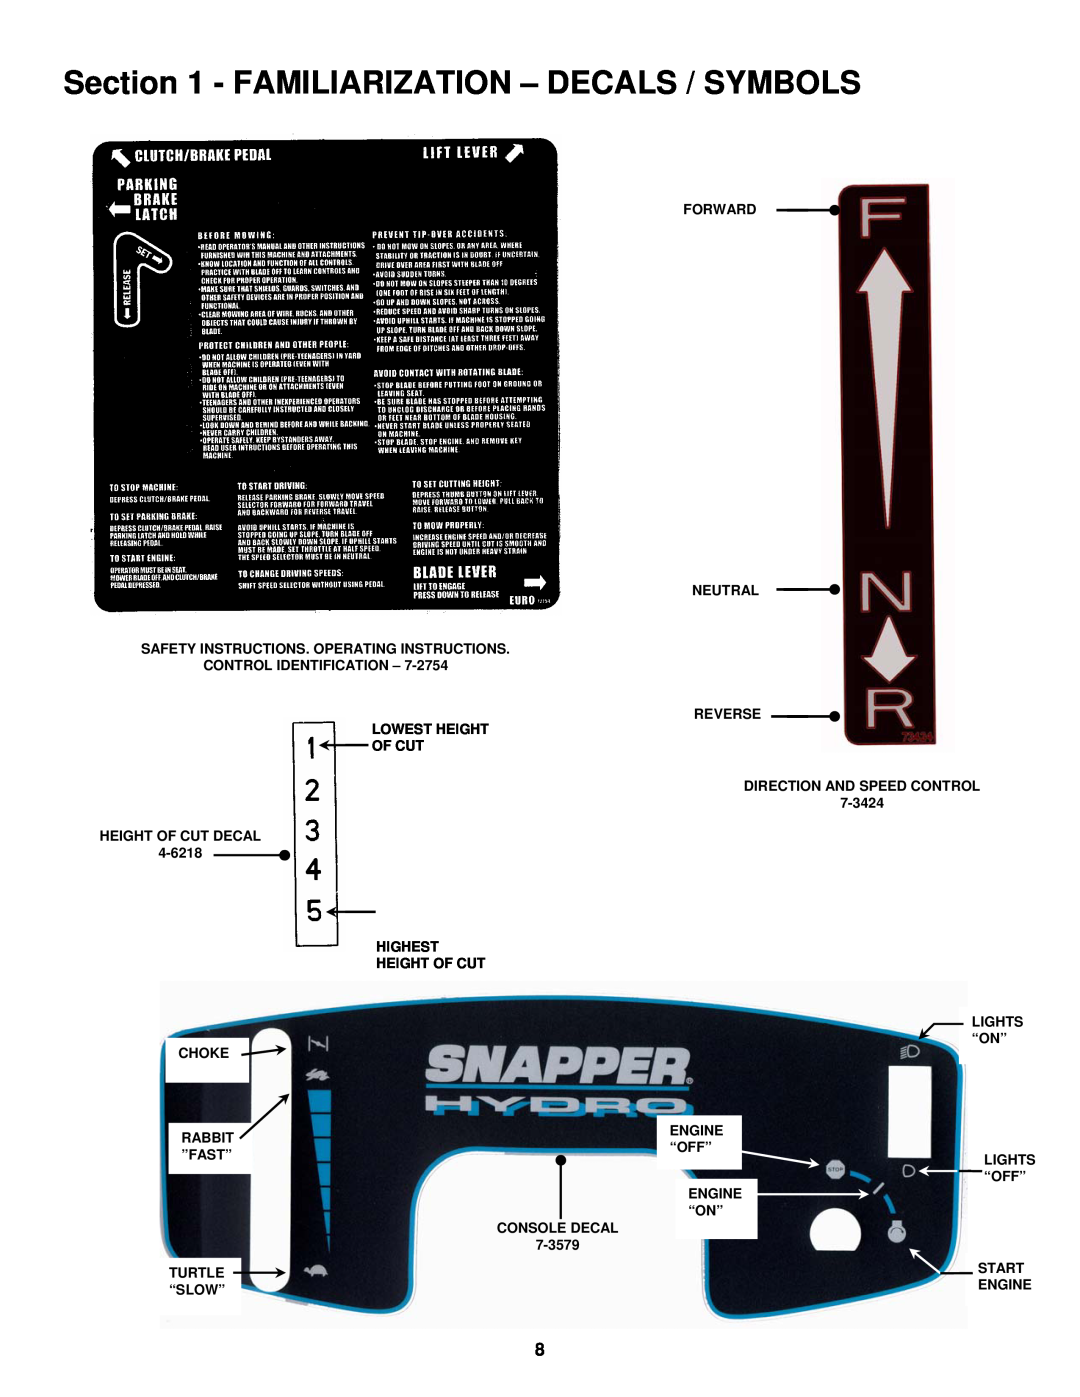 Snapper ELT180H33IBV Familiarization – Decals / Symbols, Safety Instructions. Operating Instructions, Engine 